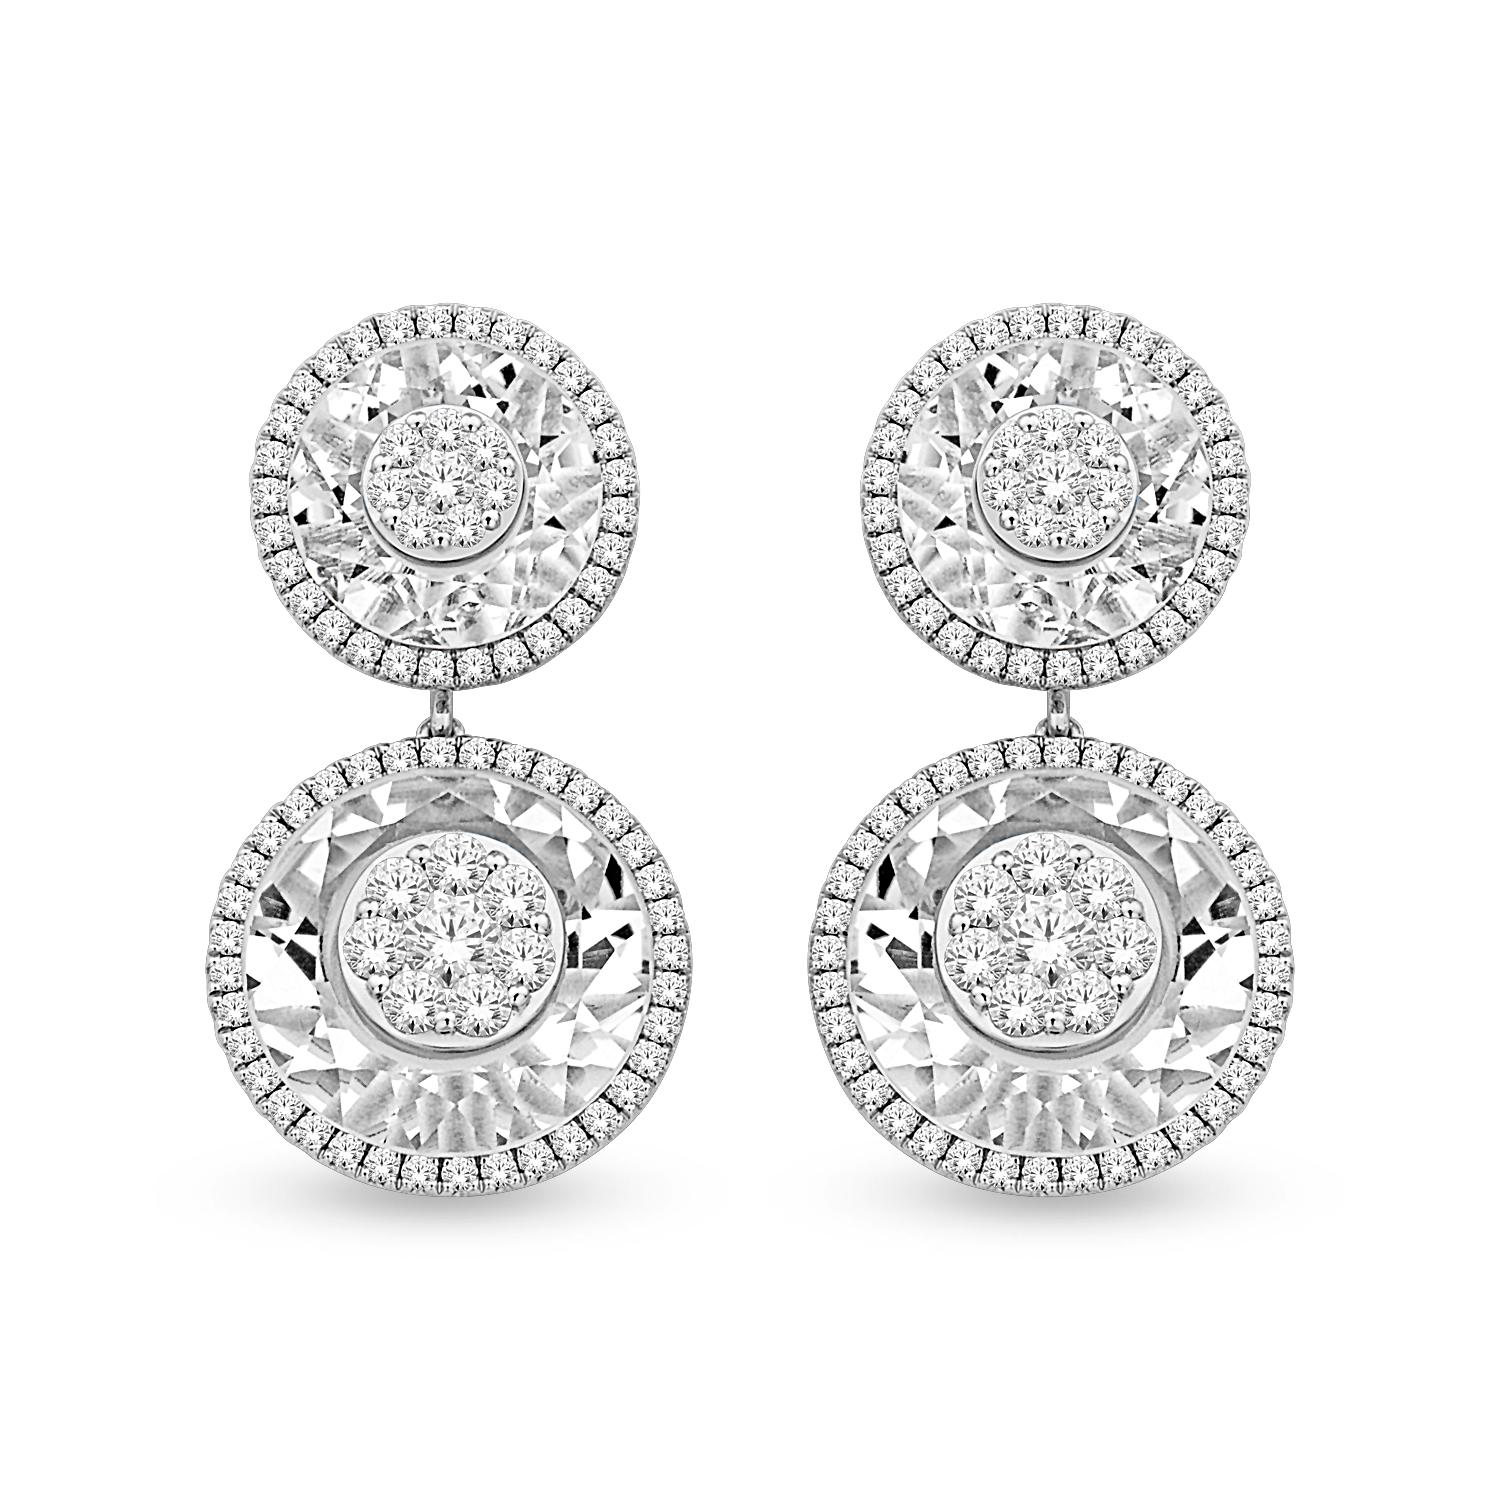 From our signature Bhansali One collection, this earring features clusters of G,VS diamonds (2.5cts) inlaid into special cut white quartz (16.25cts). We love our white quartz because it looks like one big diamond. We also pay special attention to